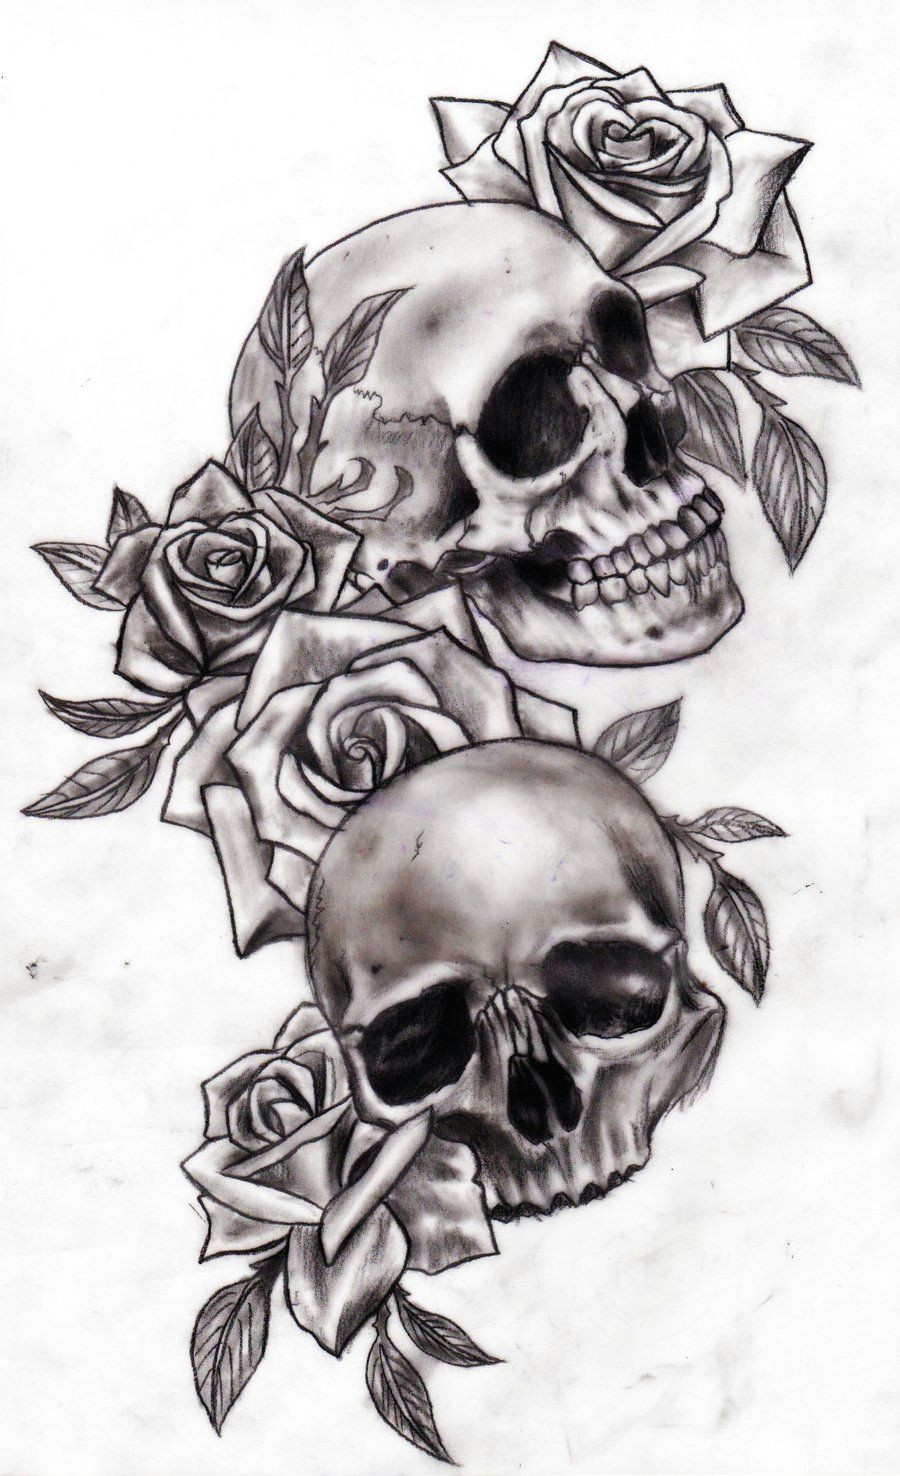 skull and rose tattoo classic i love this i want this on my back right below my live laugh love tattoo